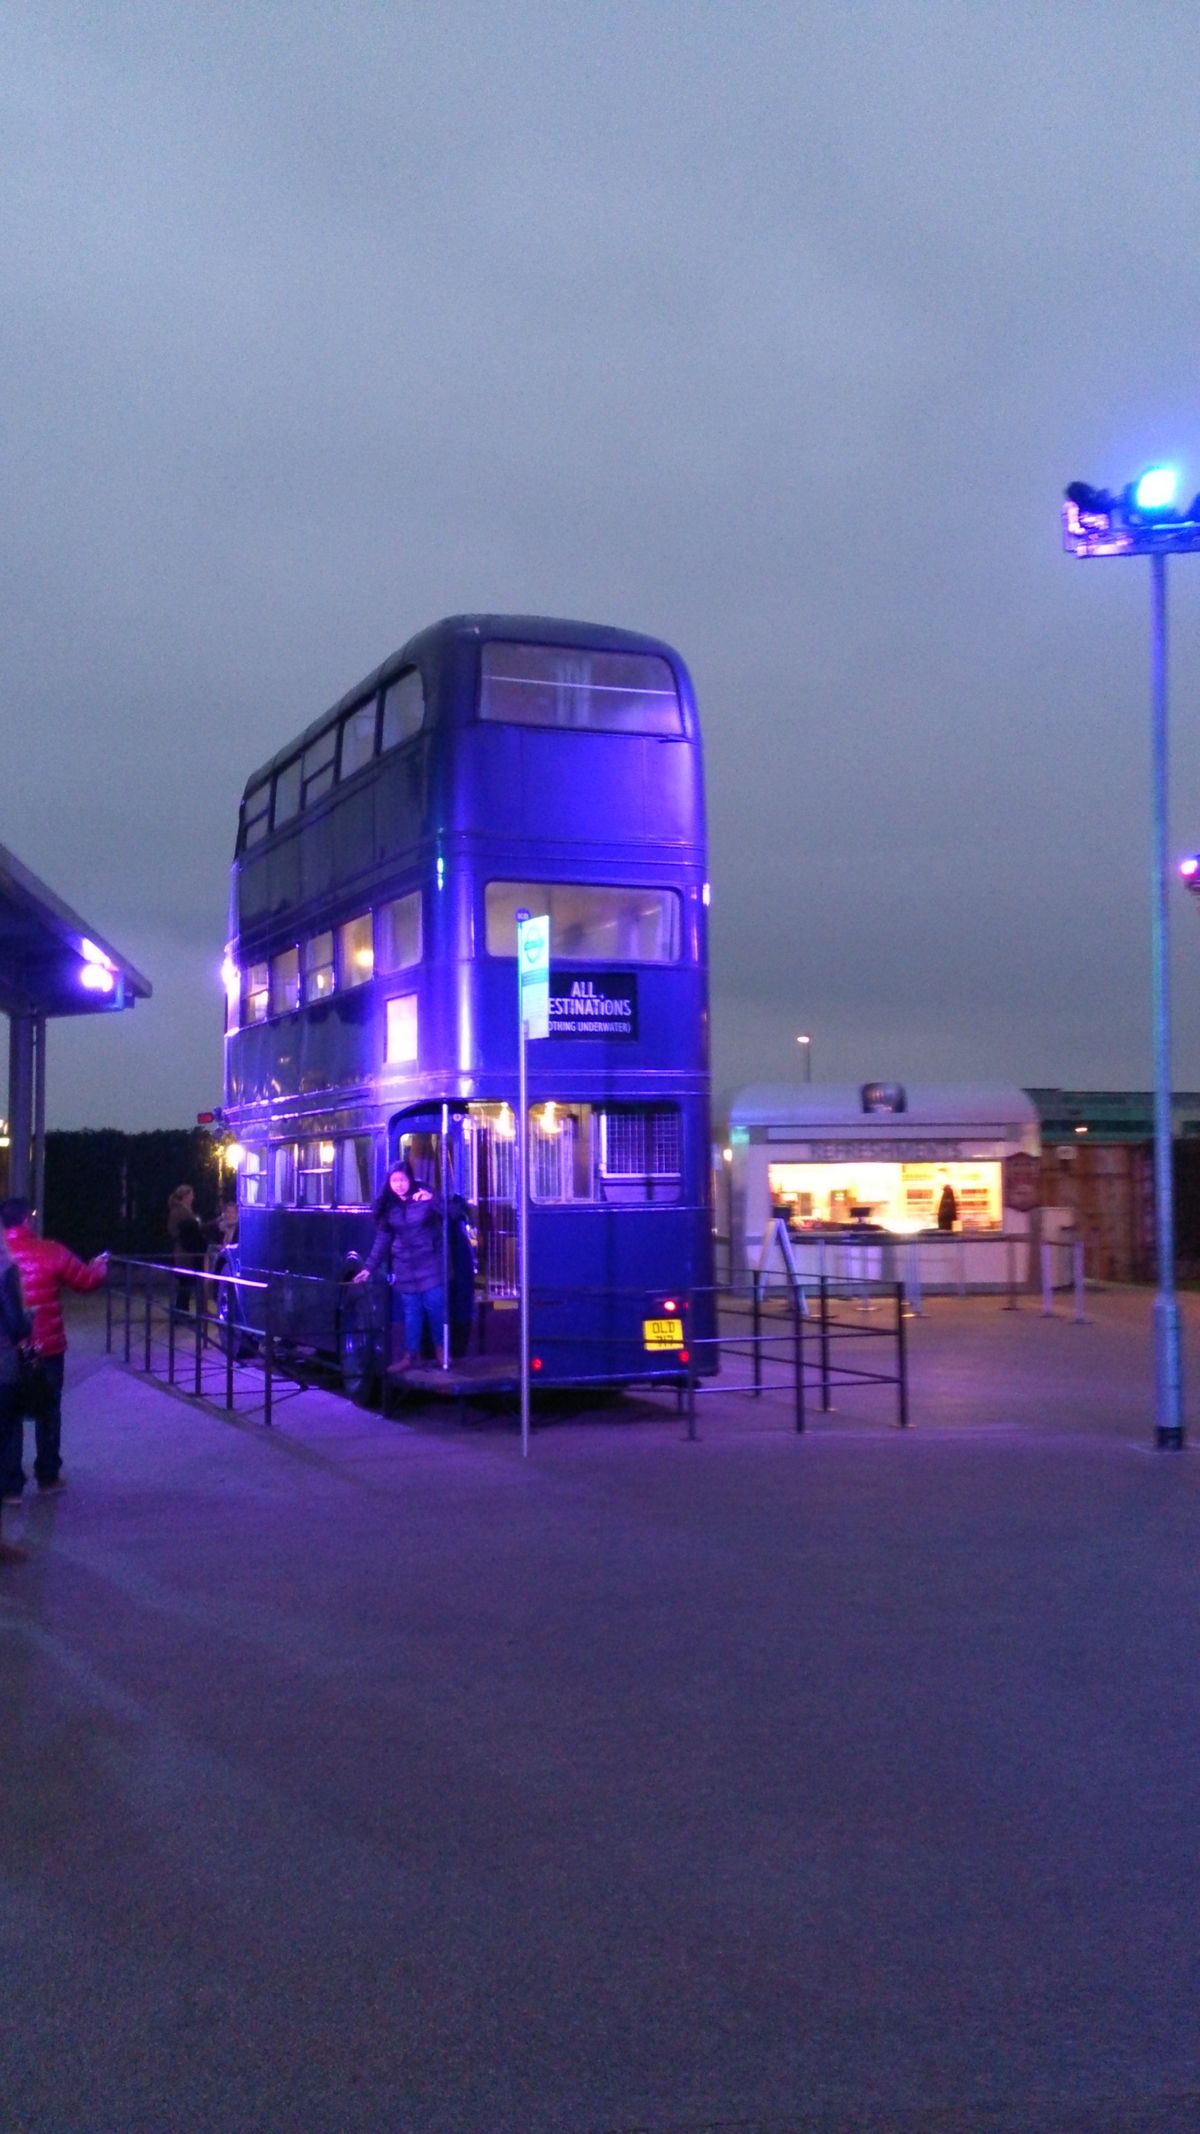 The Knight Bus at it's Bus Stop (From Harry Potter)